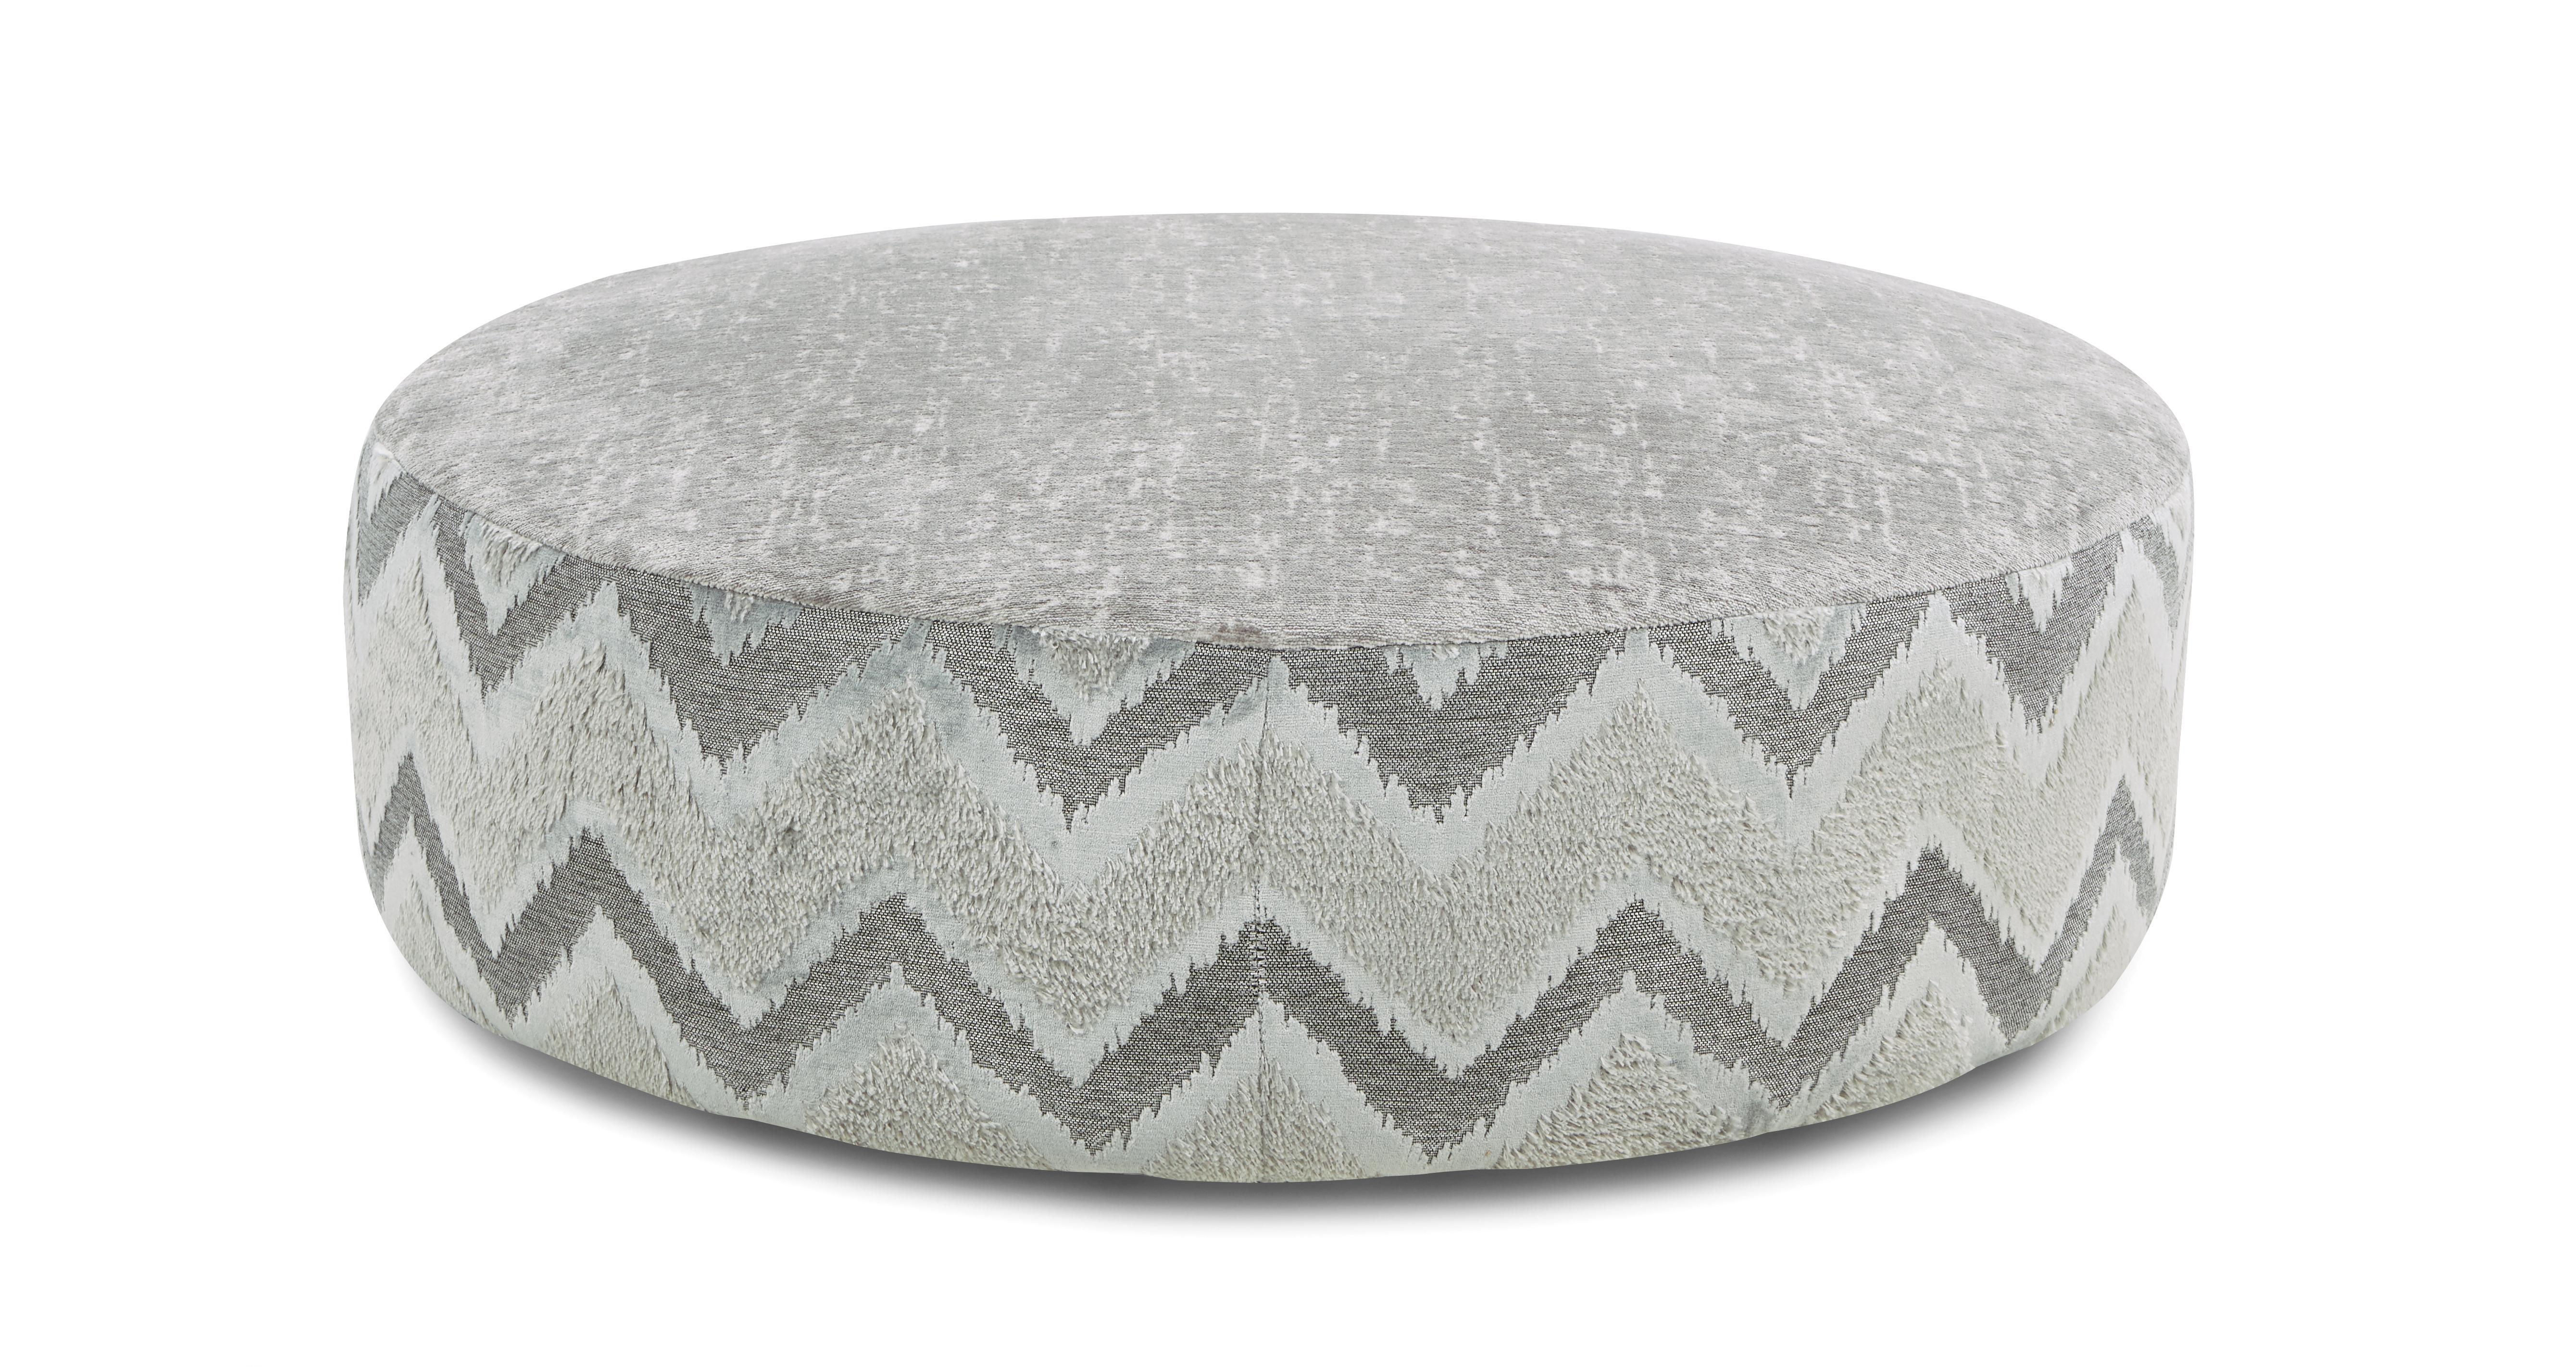 Lawrie Large Round Pattern and Plain Footstool | DFS